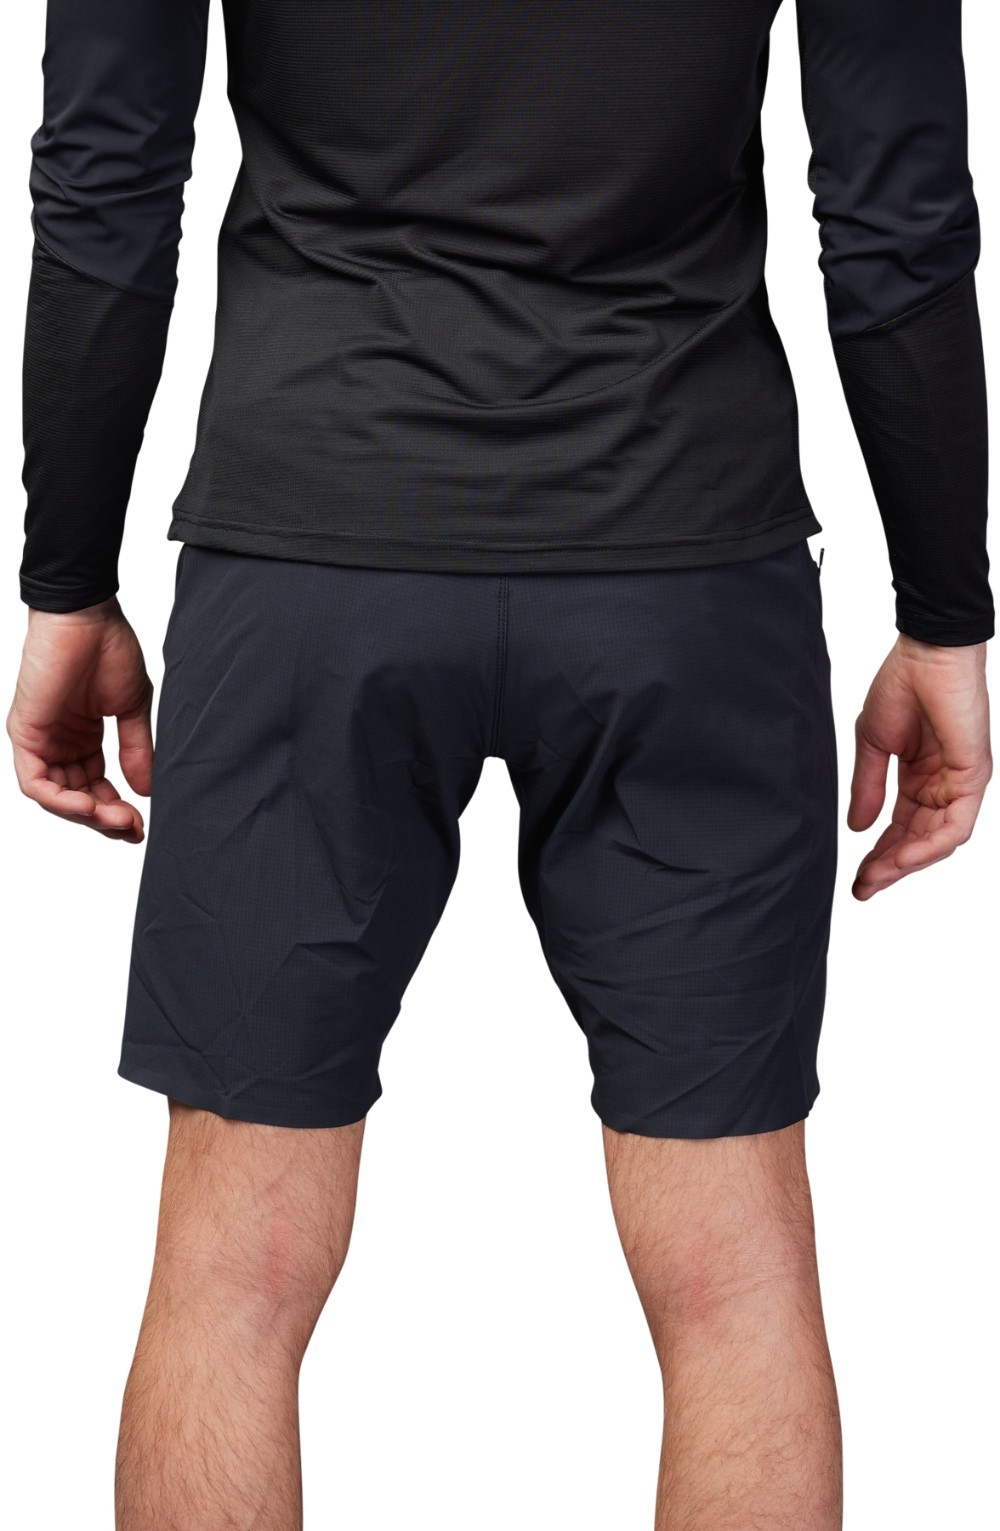 Flexair Ascent MTB Shorts with Liner image 1